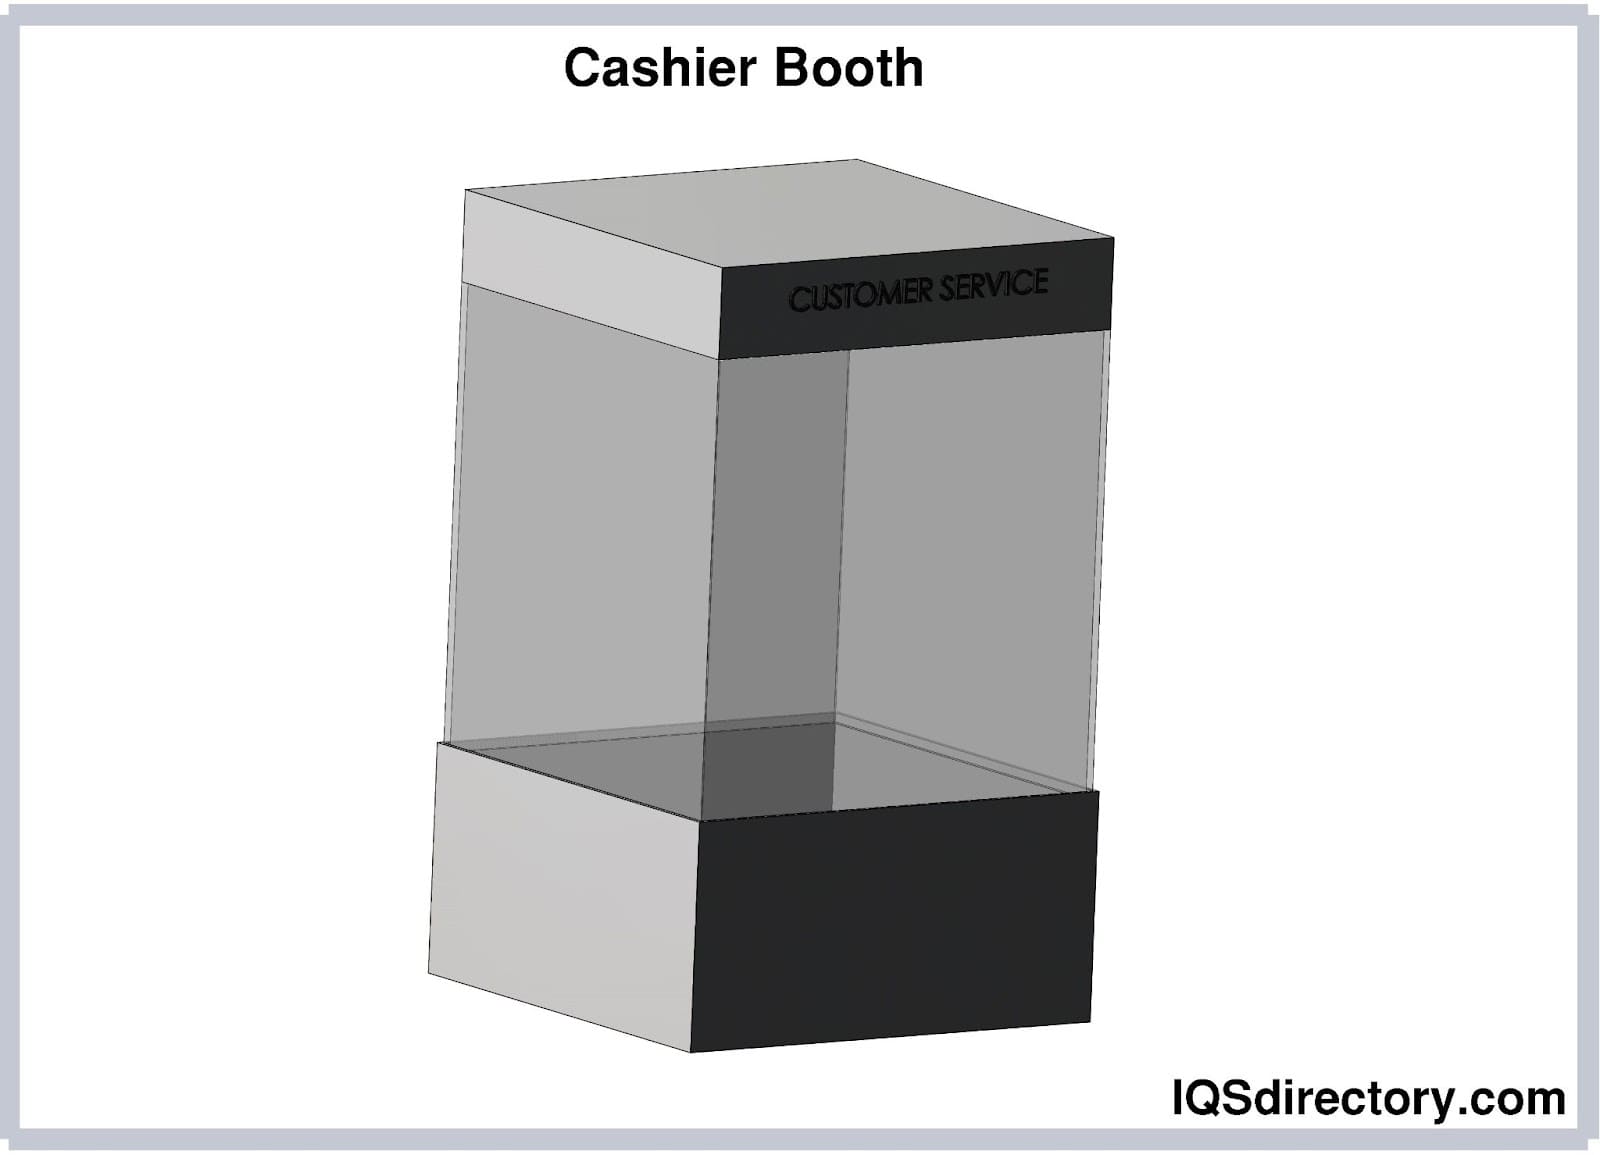 Cashier Booth